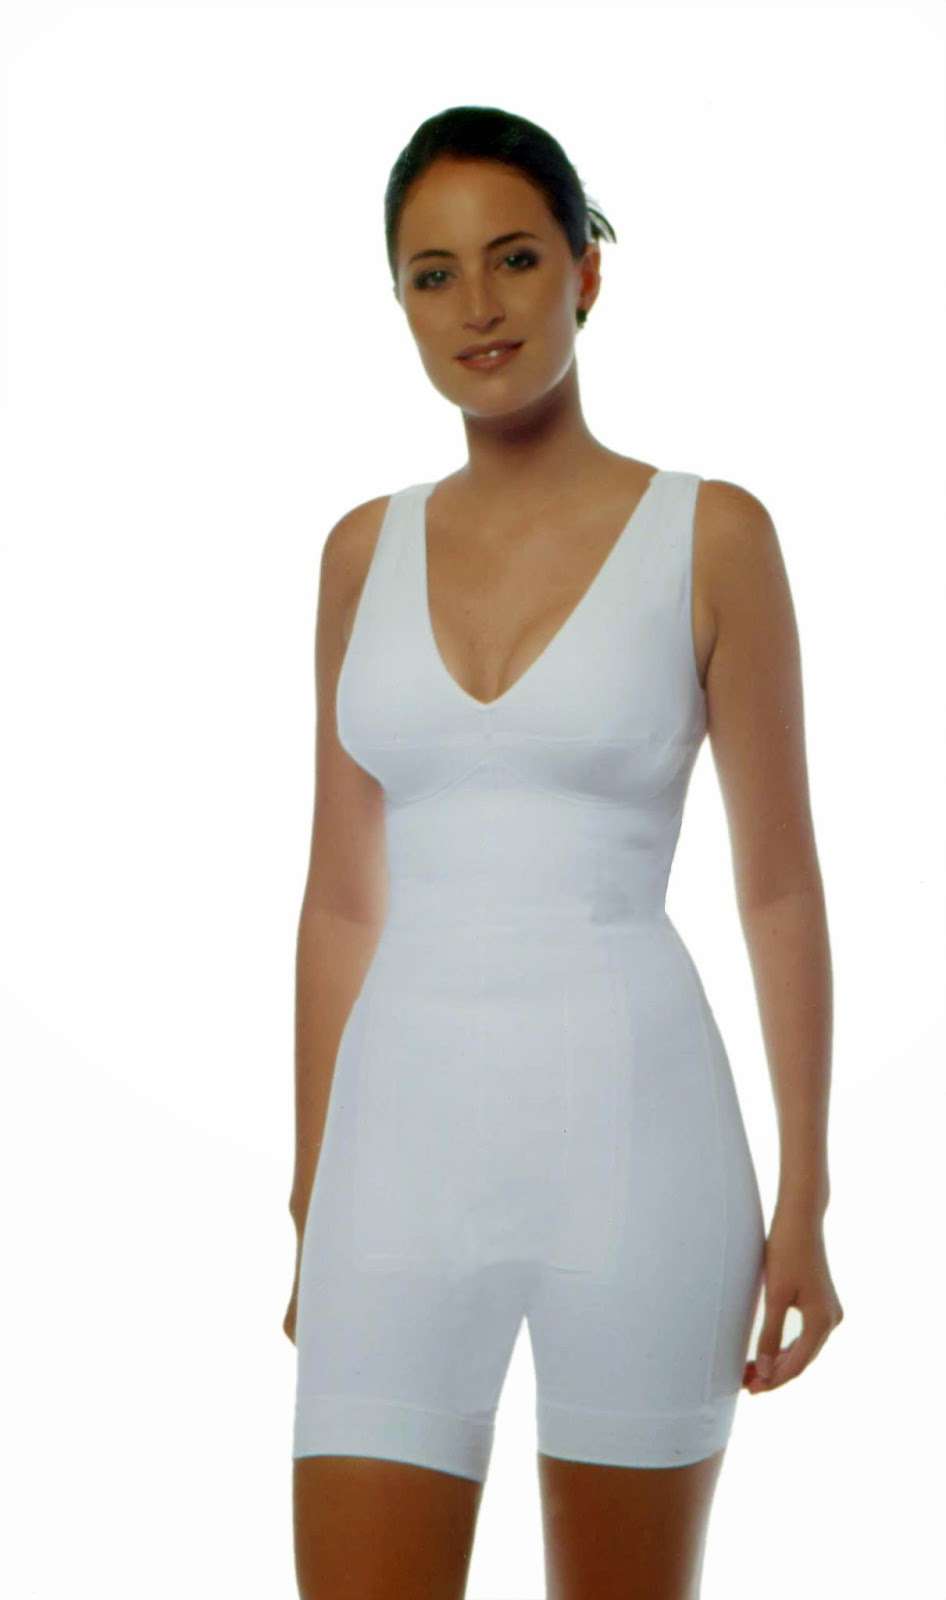 Taras Miracle Girdles | 3007 W Commercial Blvd Suite 203, Fort Lauderdale, FL 33309, USA | Phone: (954) 663-6079